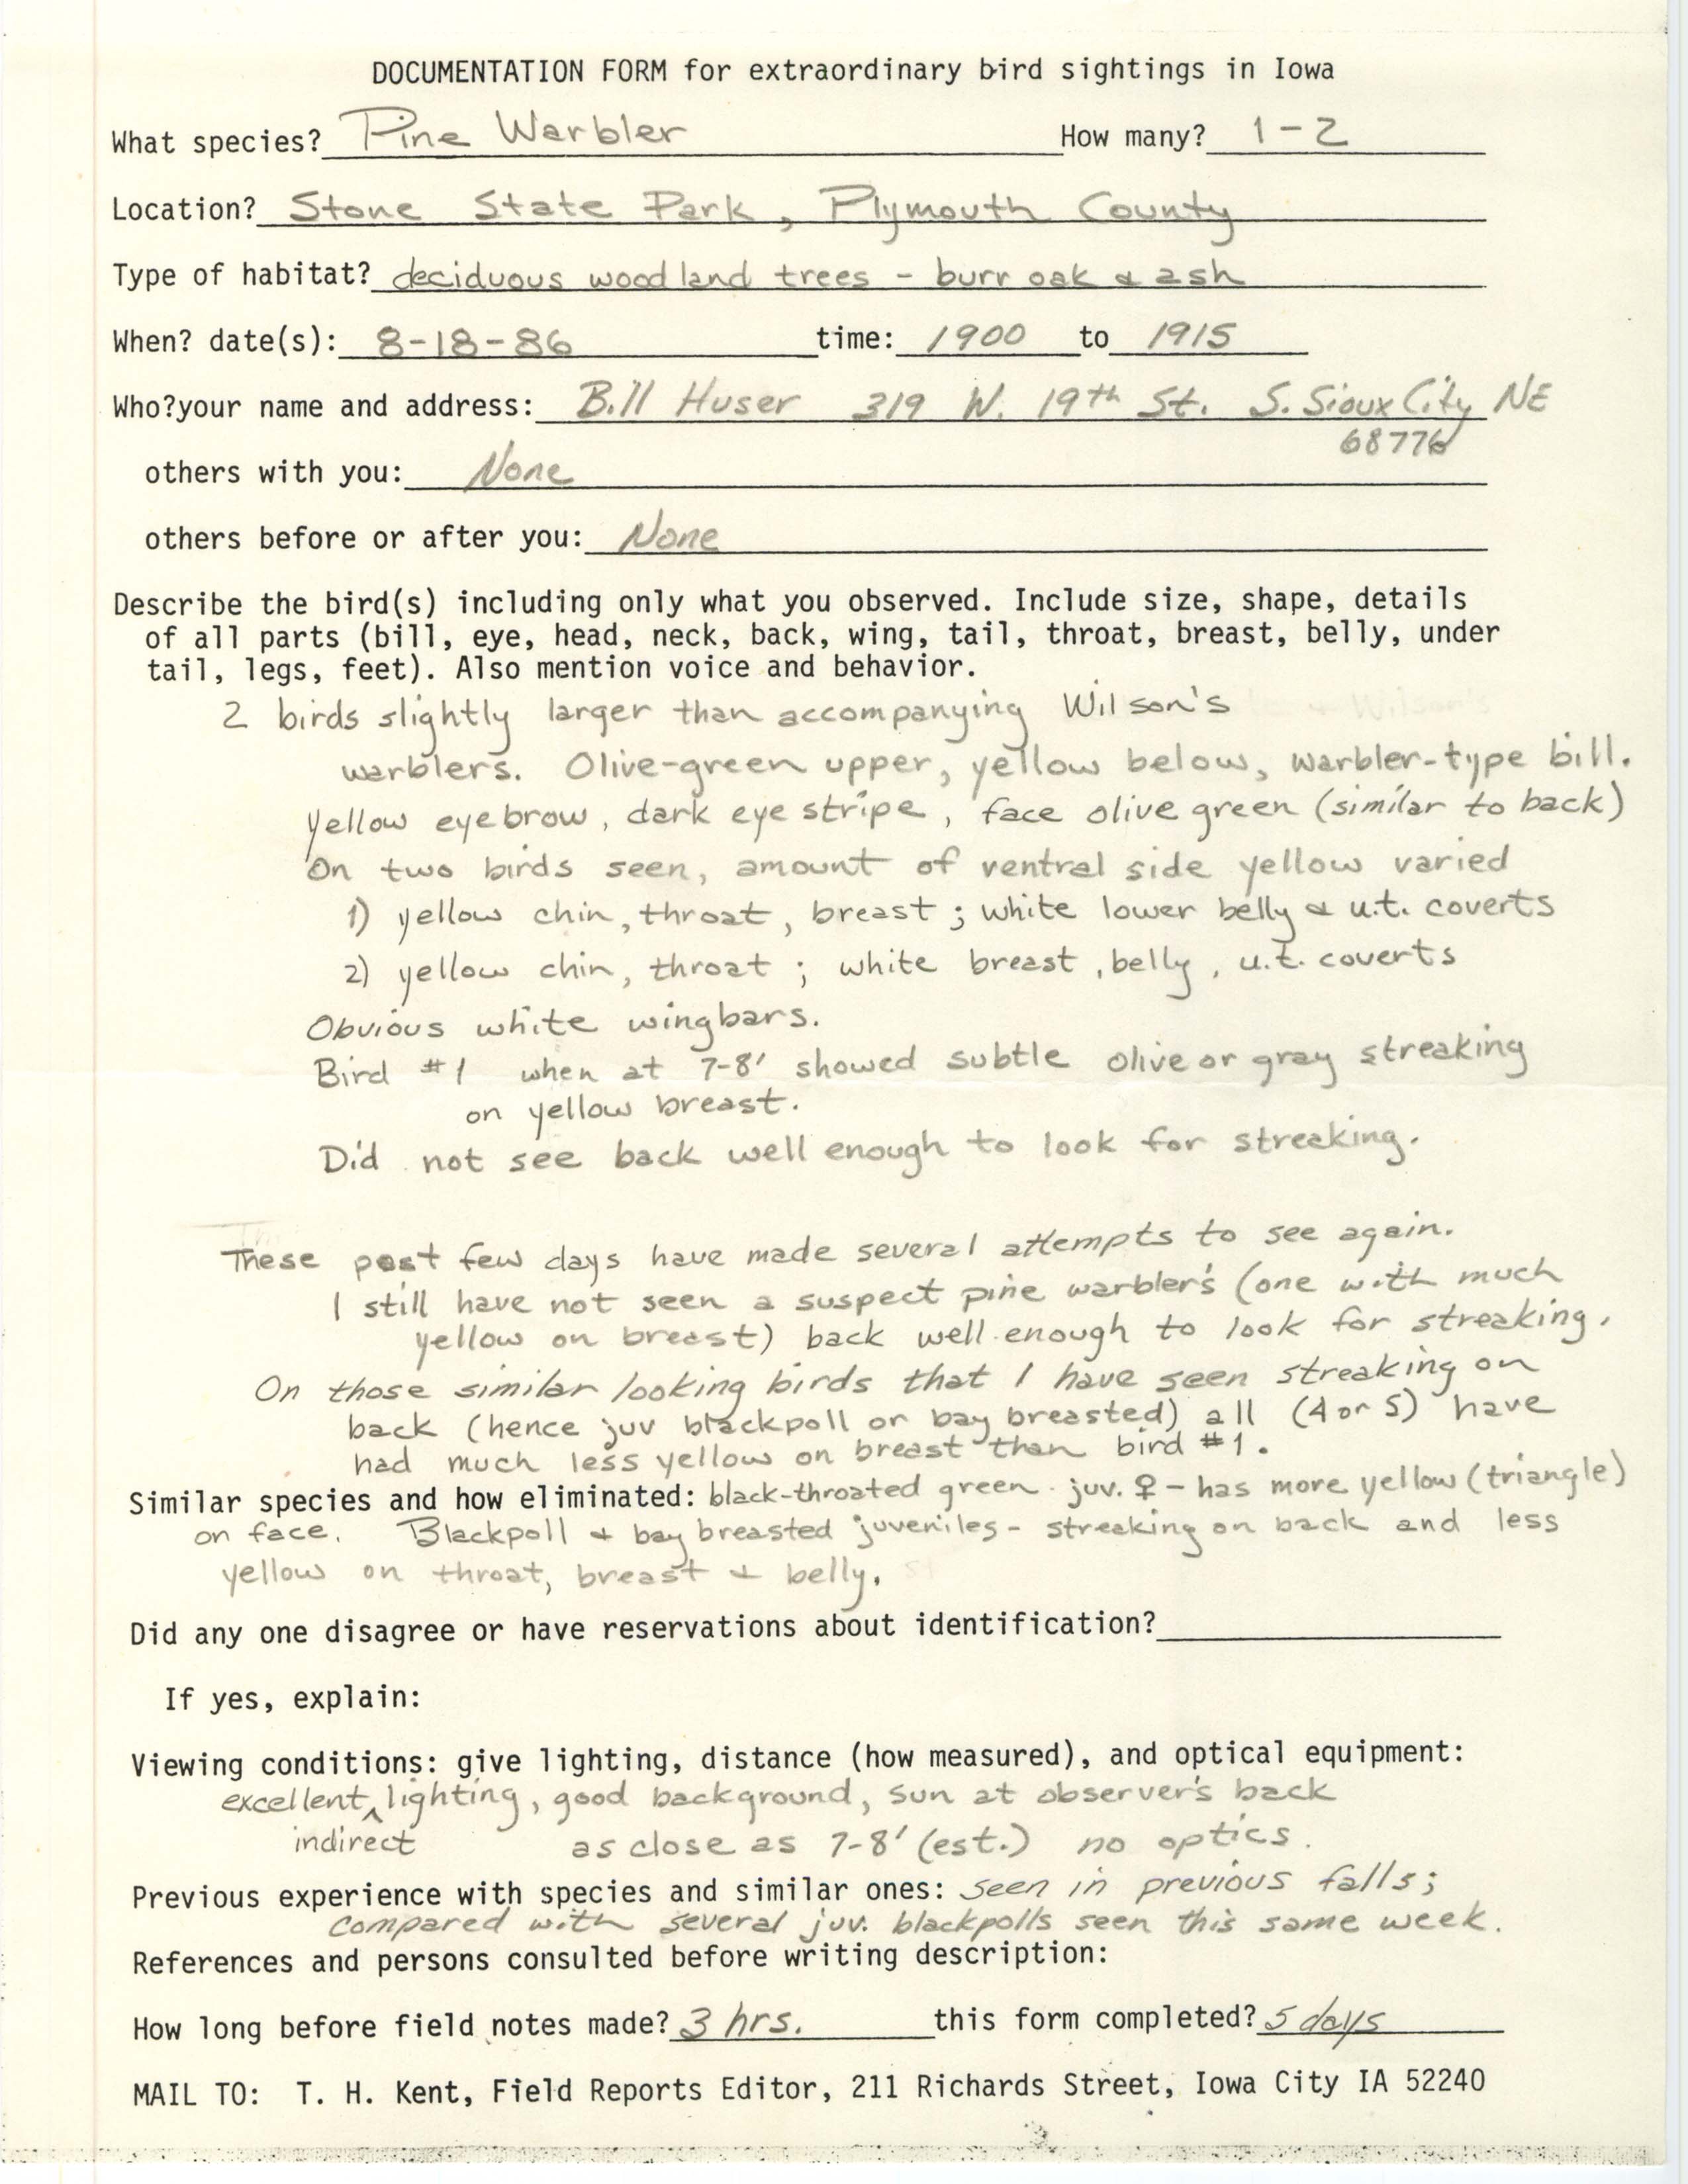 Rare bird documentation form for Pine Warbler at Stone State Park, 1986